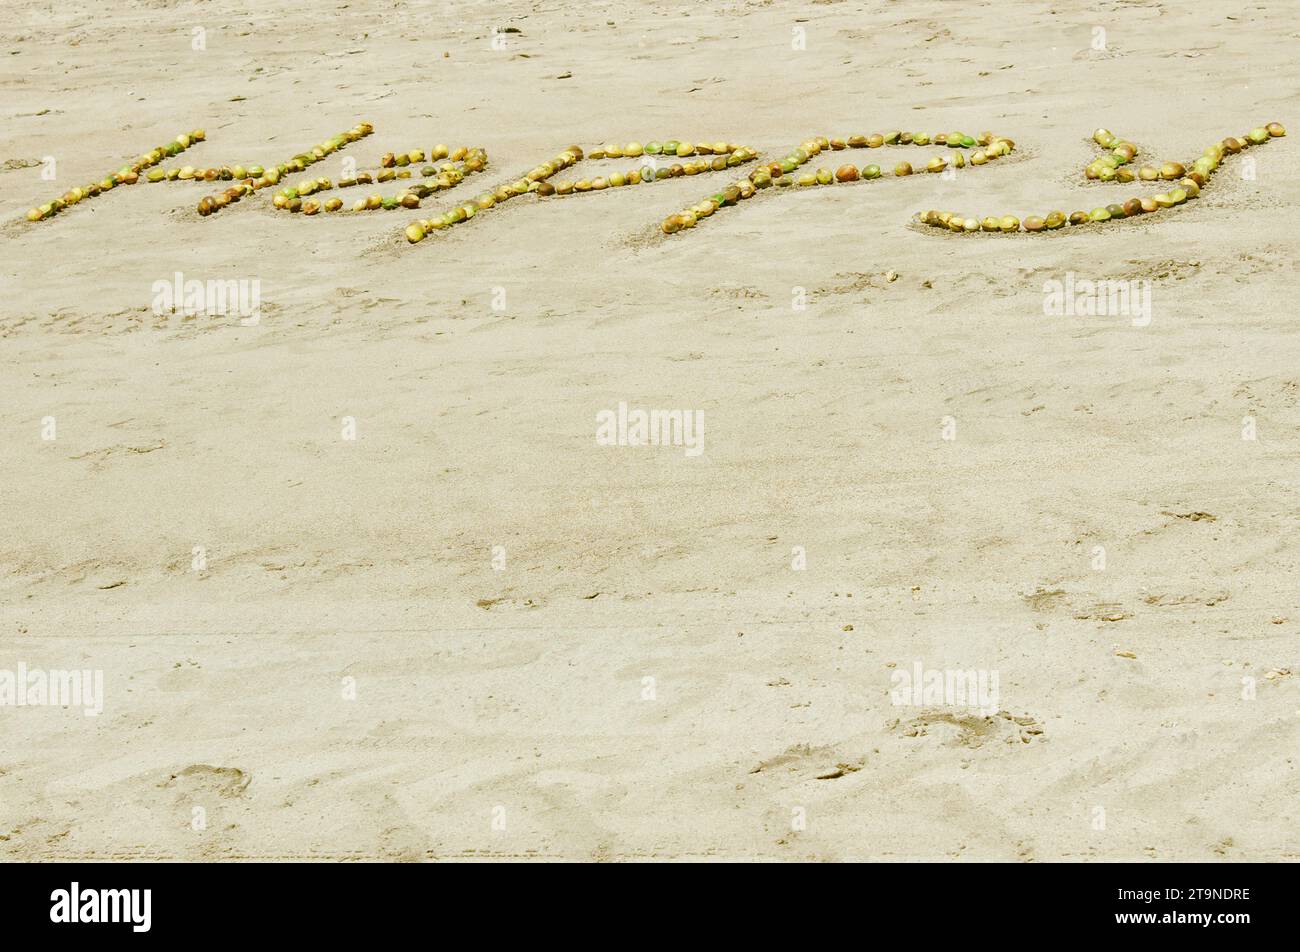 The word happy written with regional tropical fruits on the beach sand, to greet and inspire tourists visiting Vila Morro de São Paulo, Bahia, Brazil. Stock Photo